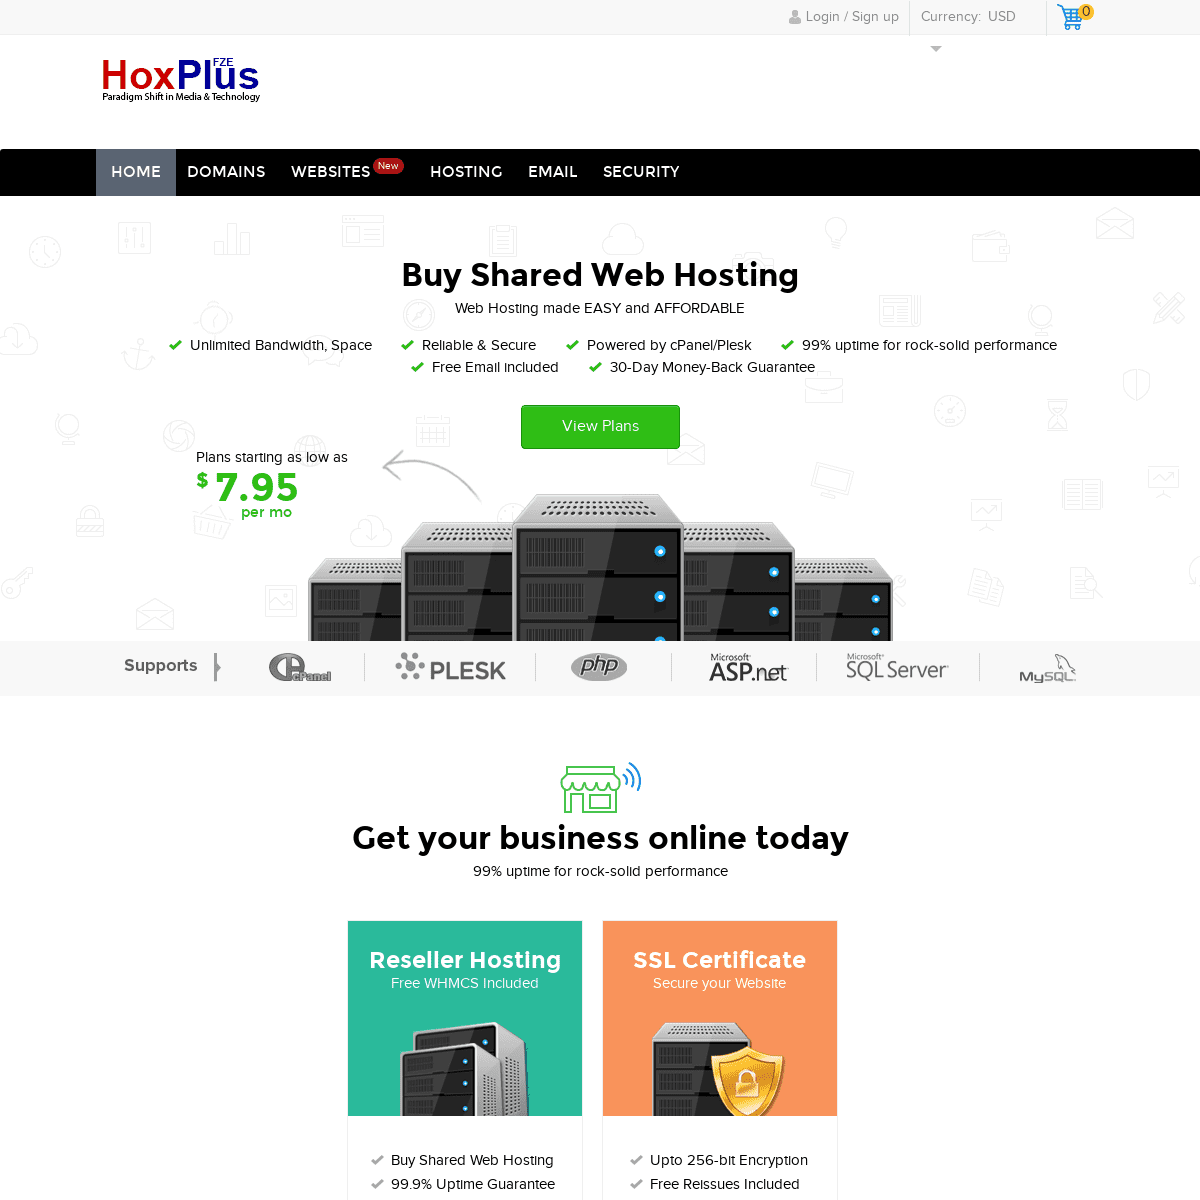 A complete backup of eehosting.com